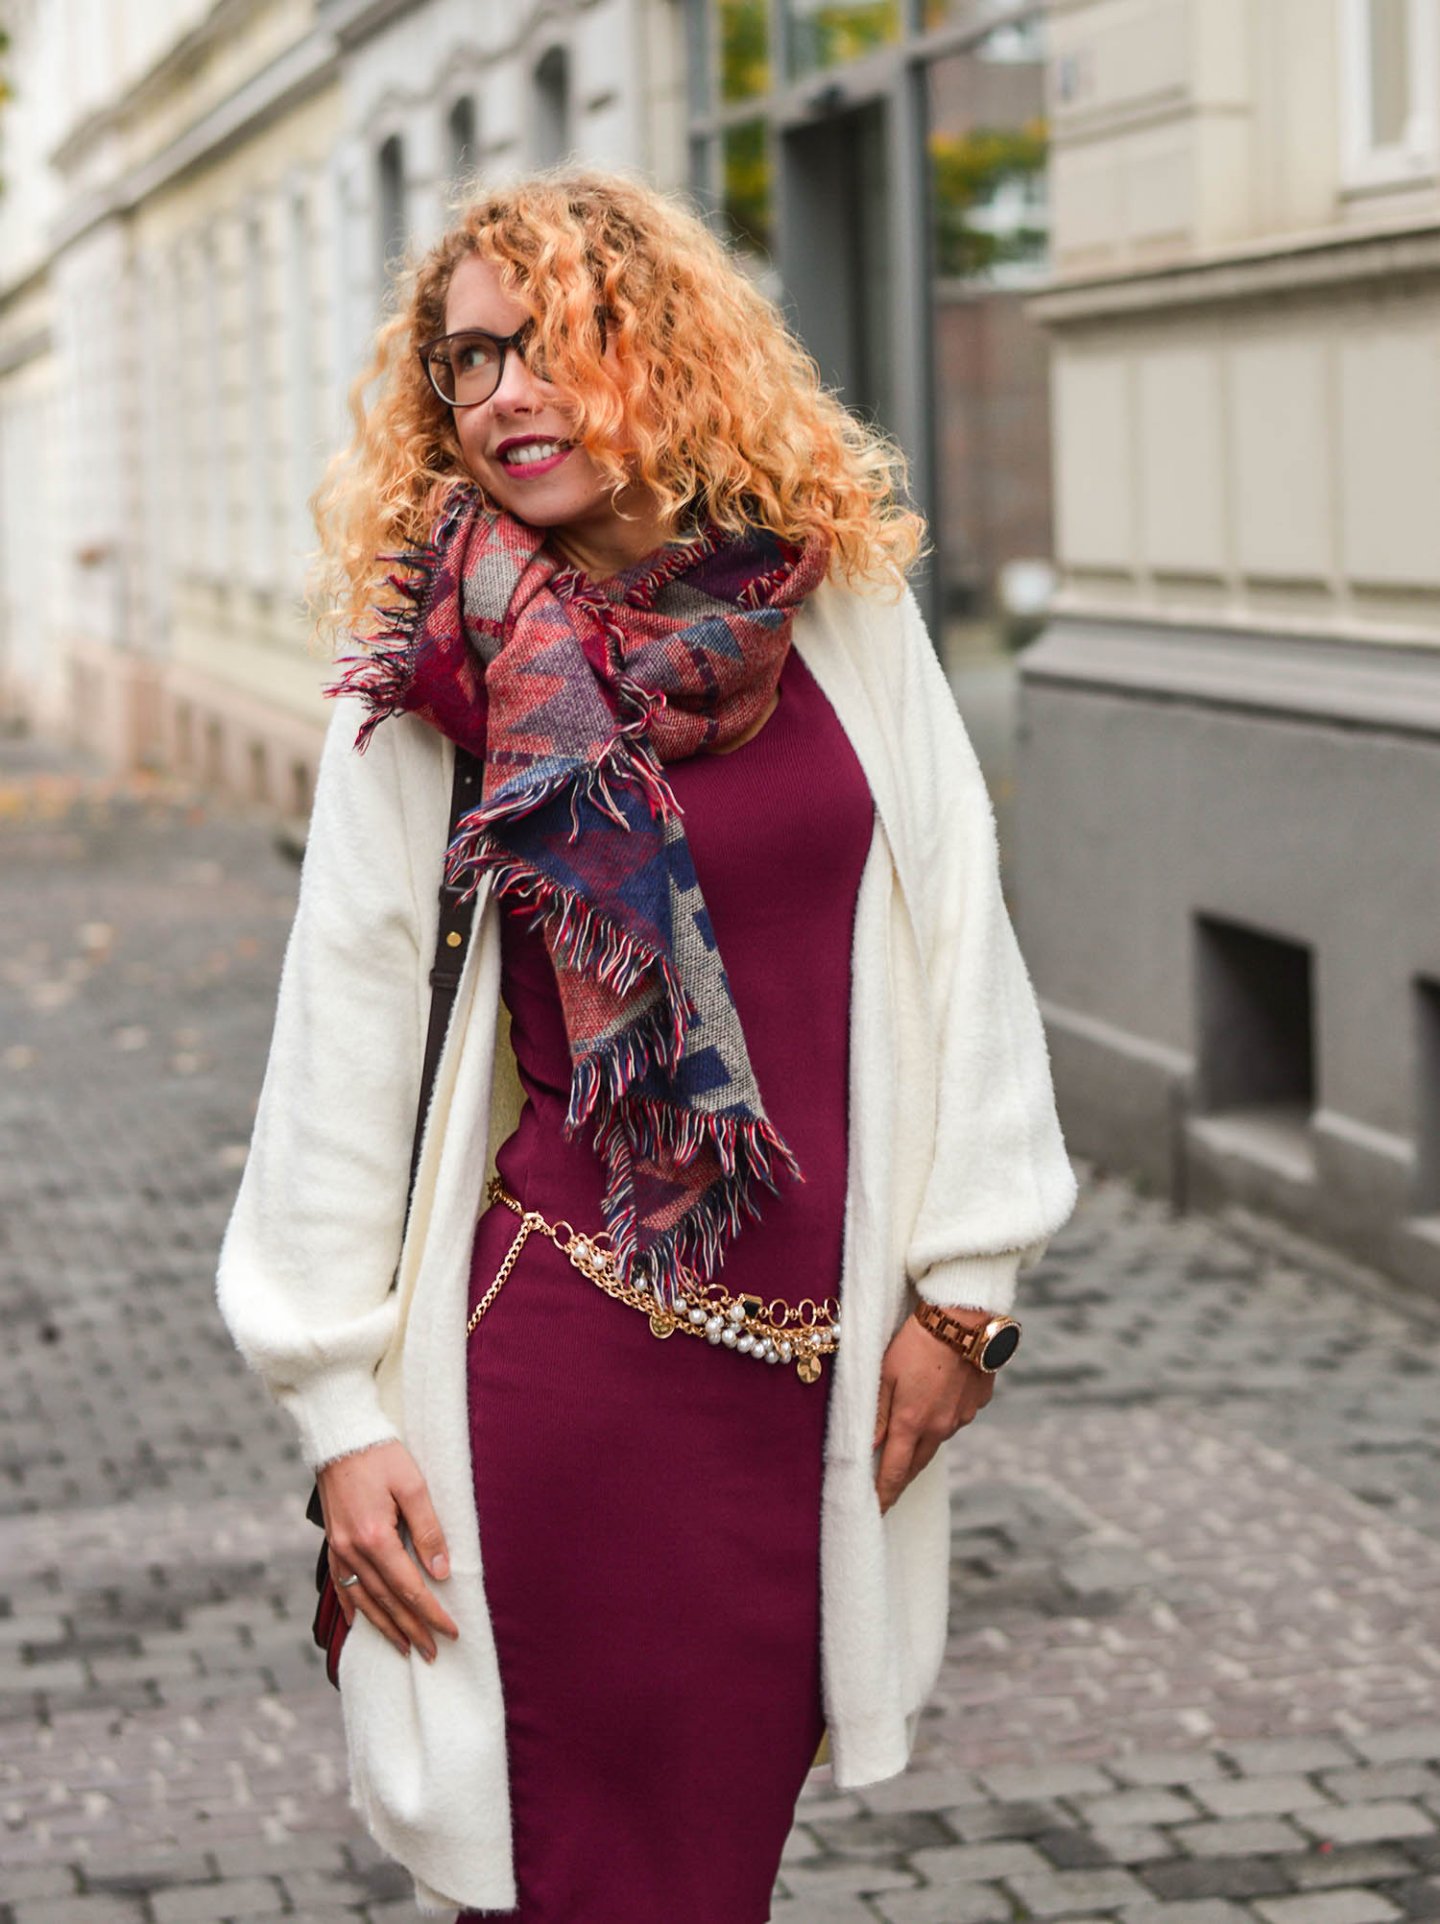 Chain-Belt-White-Cardigan-Burgundy-Dress-kationette-fashionblogger-outfit